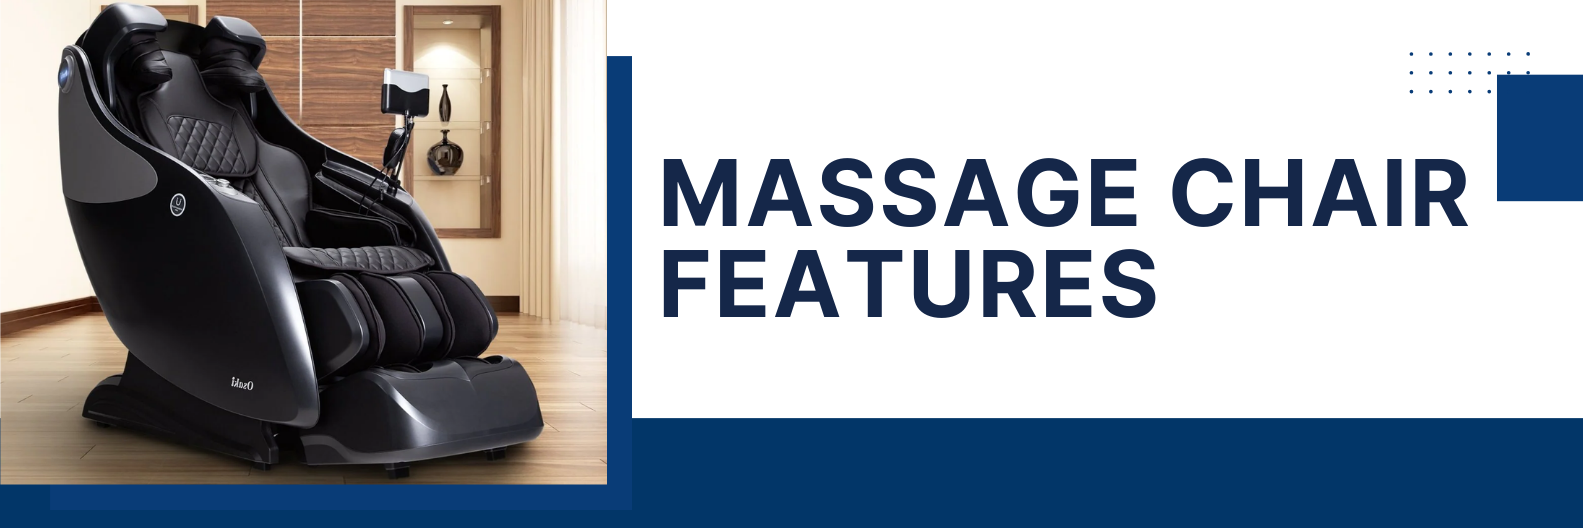 The best massage chair features are designed to provide healing massage therapy with maximum relaxation and pain relief. 